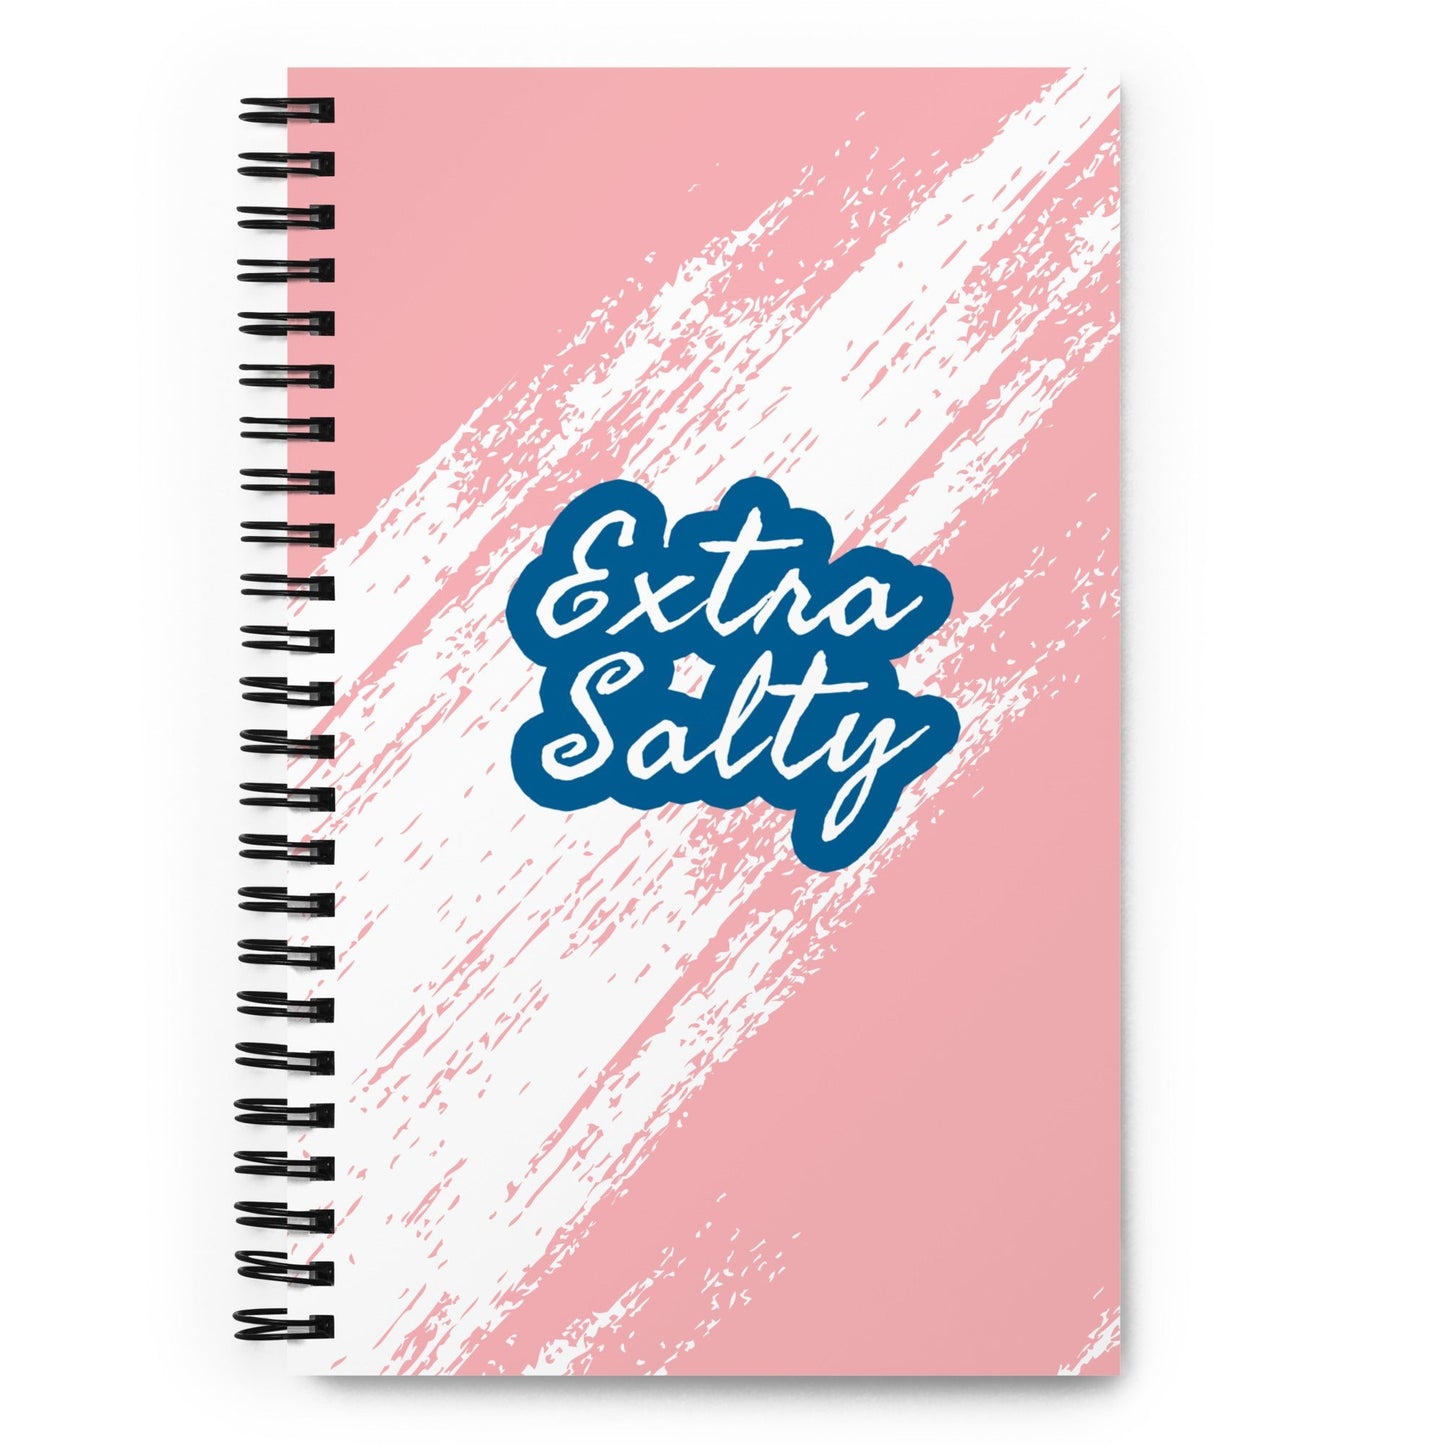 "Extra Salty" Spiral notebook - The Nerd Supply Company